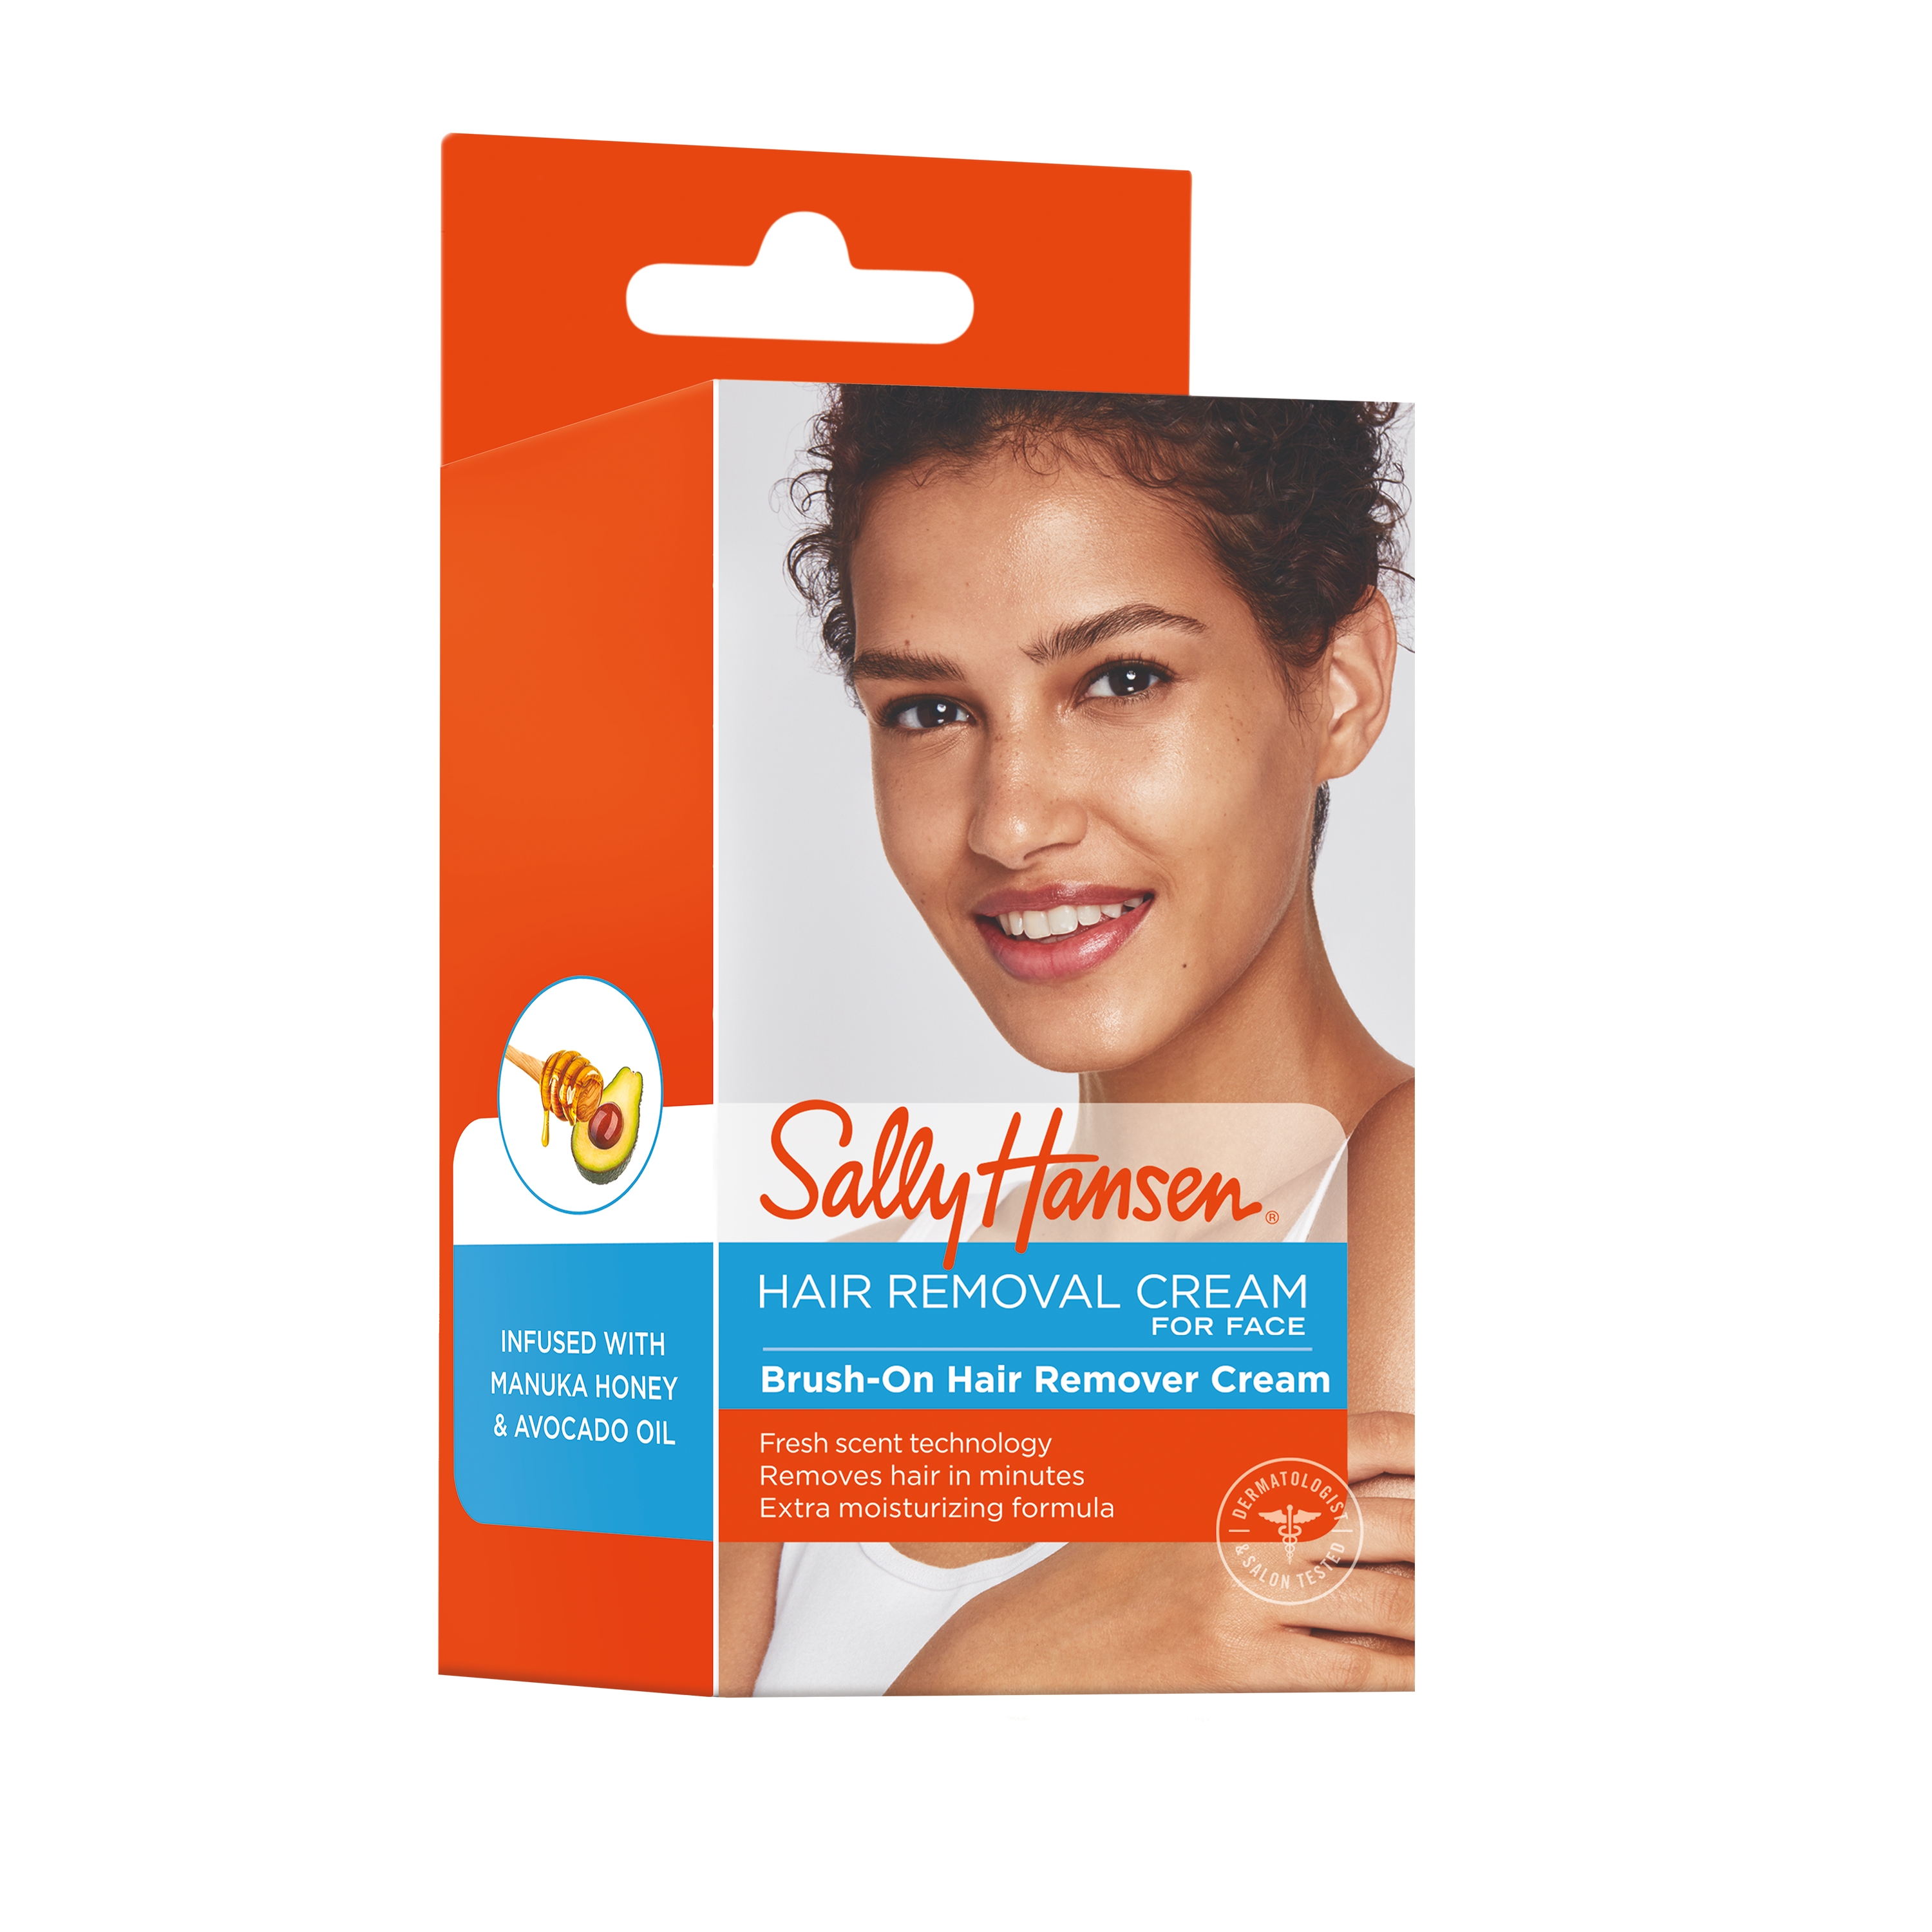 Sally Hansen Brush-On Hair Remover Creme for Face, 1.7 Oz. - image 1 of 4